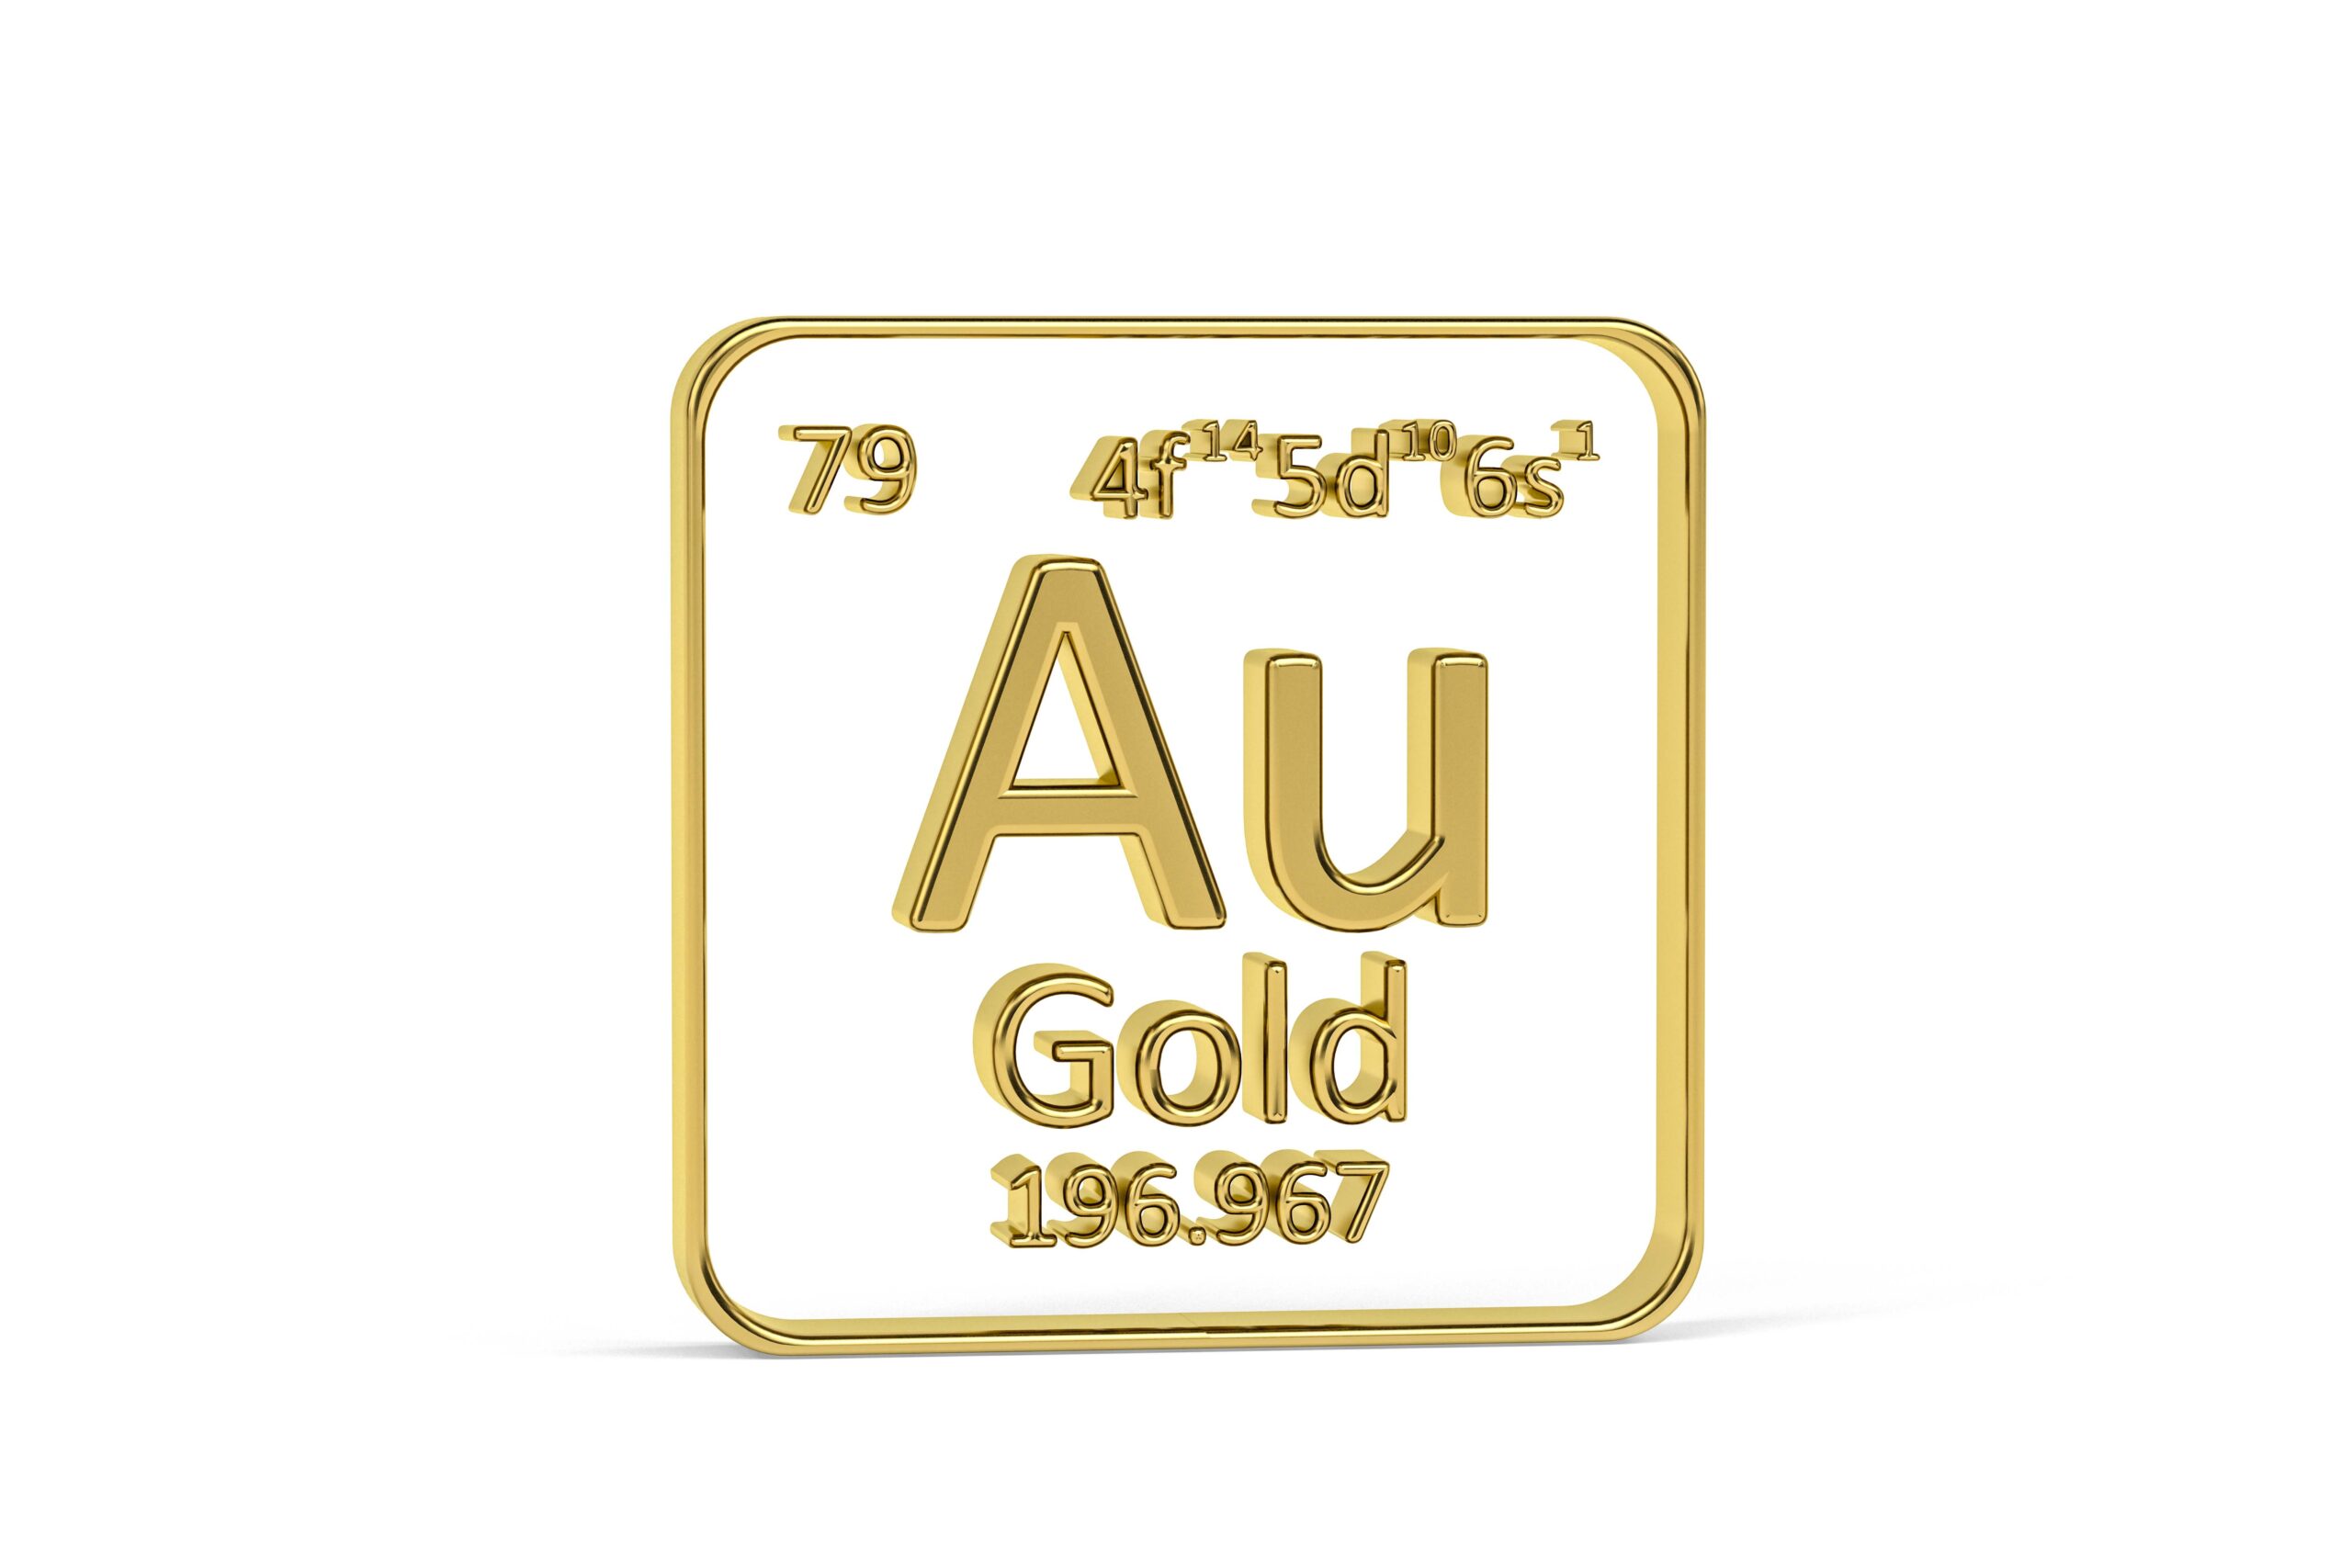 3D rendering of a gold-colored periodic table element block for gold (Au), essential for gold investing, featuring its atomic number 79, symbol, and atomic weight on a white background.